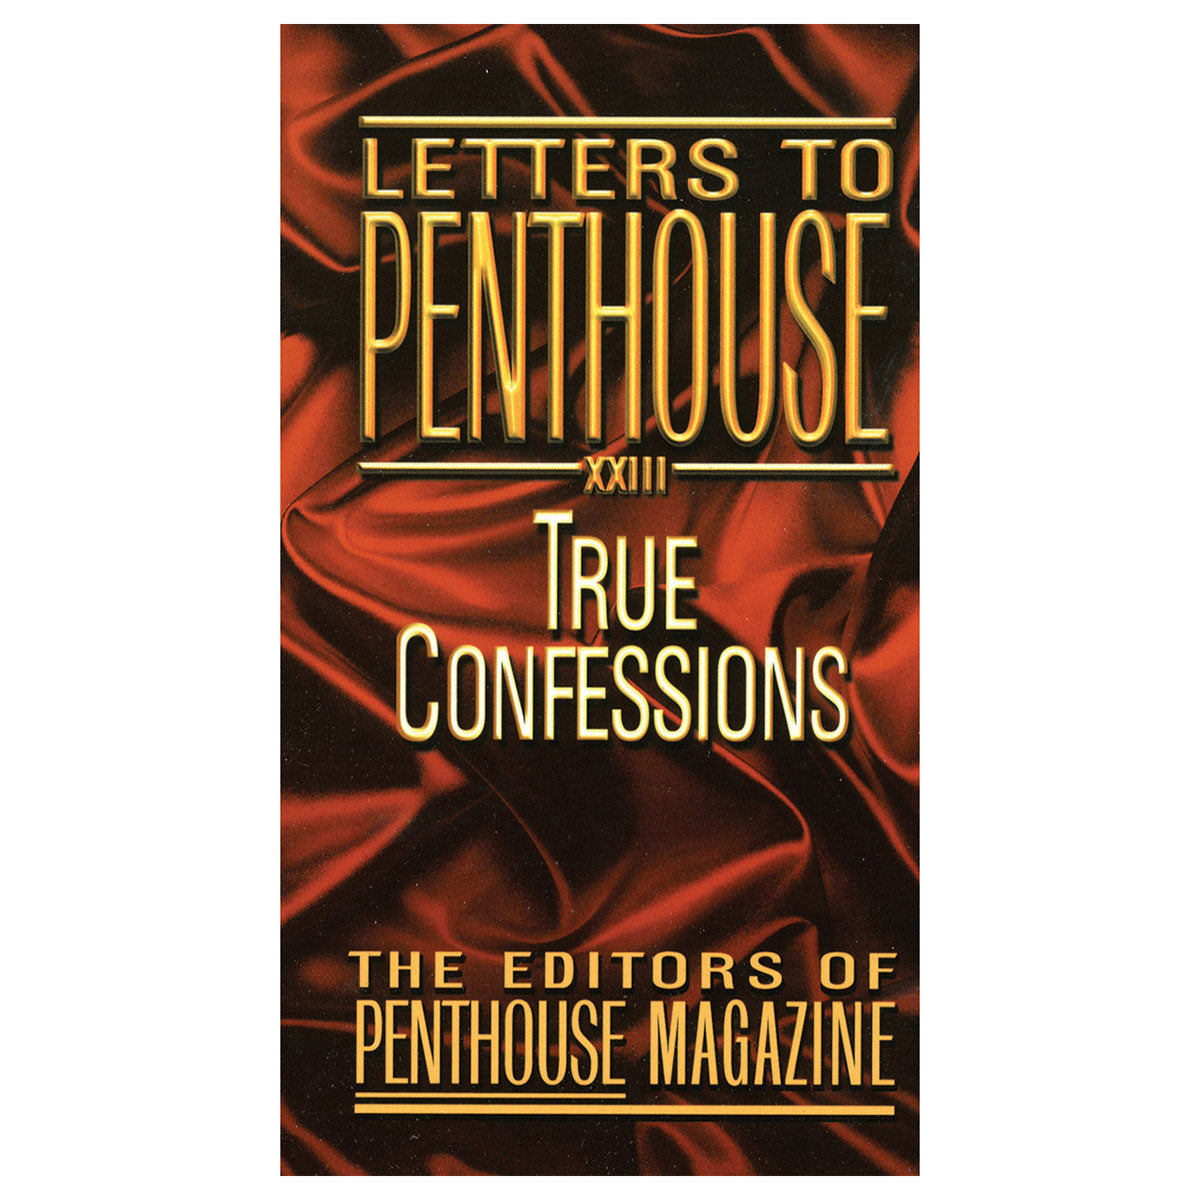 Letters to Penthouse XXIII - True Confessions - Grand Central Publishing